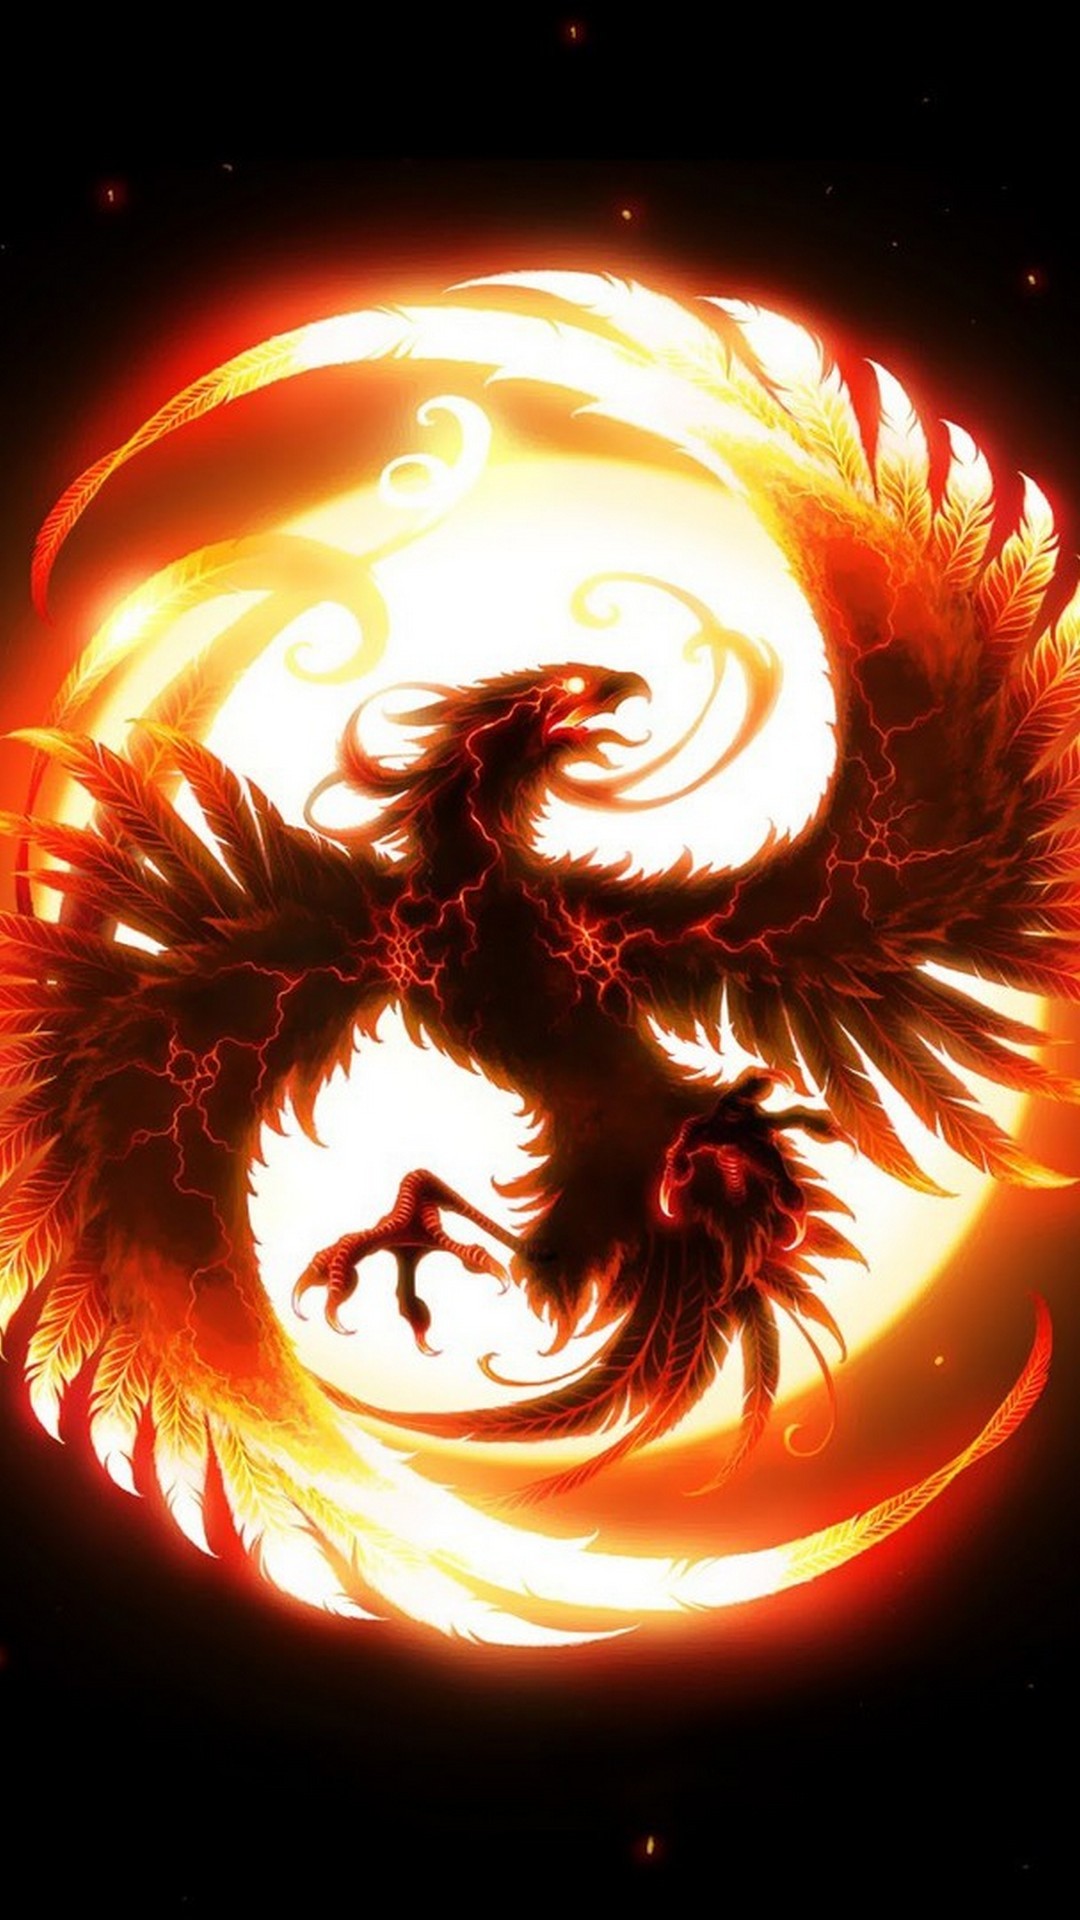 Android Wallpaper Phoenix with resolution 1080X1920 pixel. You can make this wallpaper for your Android backgrounds, Tablet, Smartphones Screensavers and Mobile Phone Lock Screen